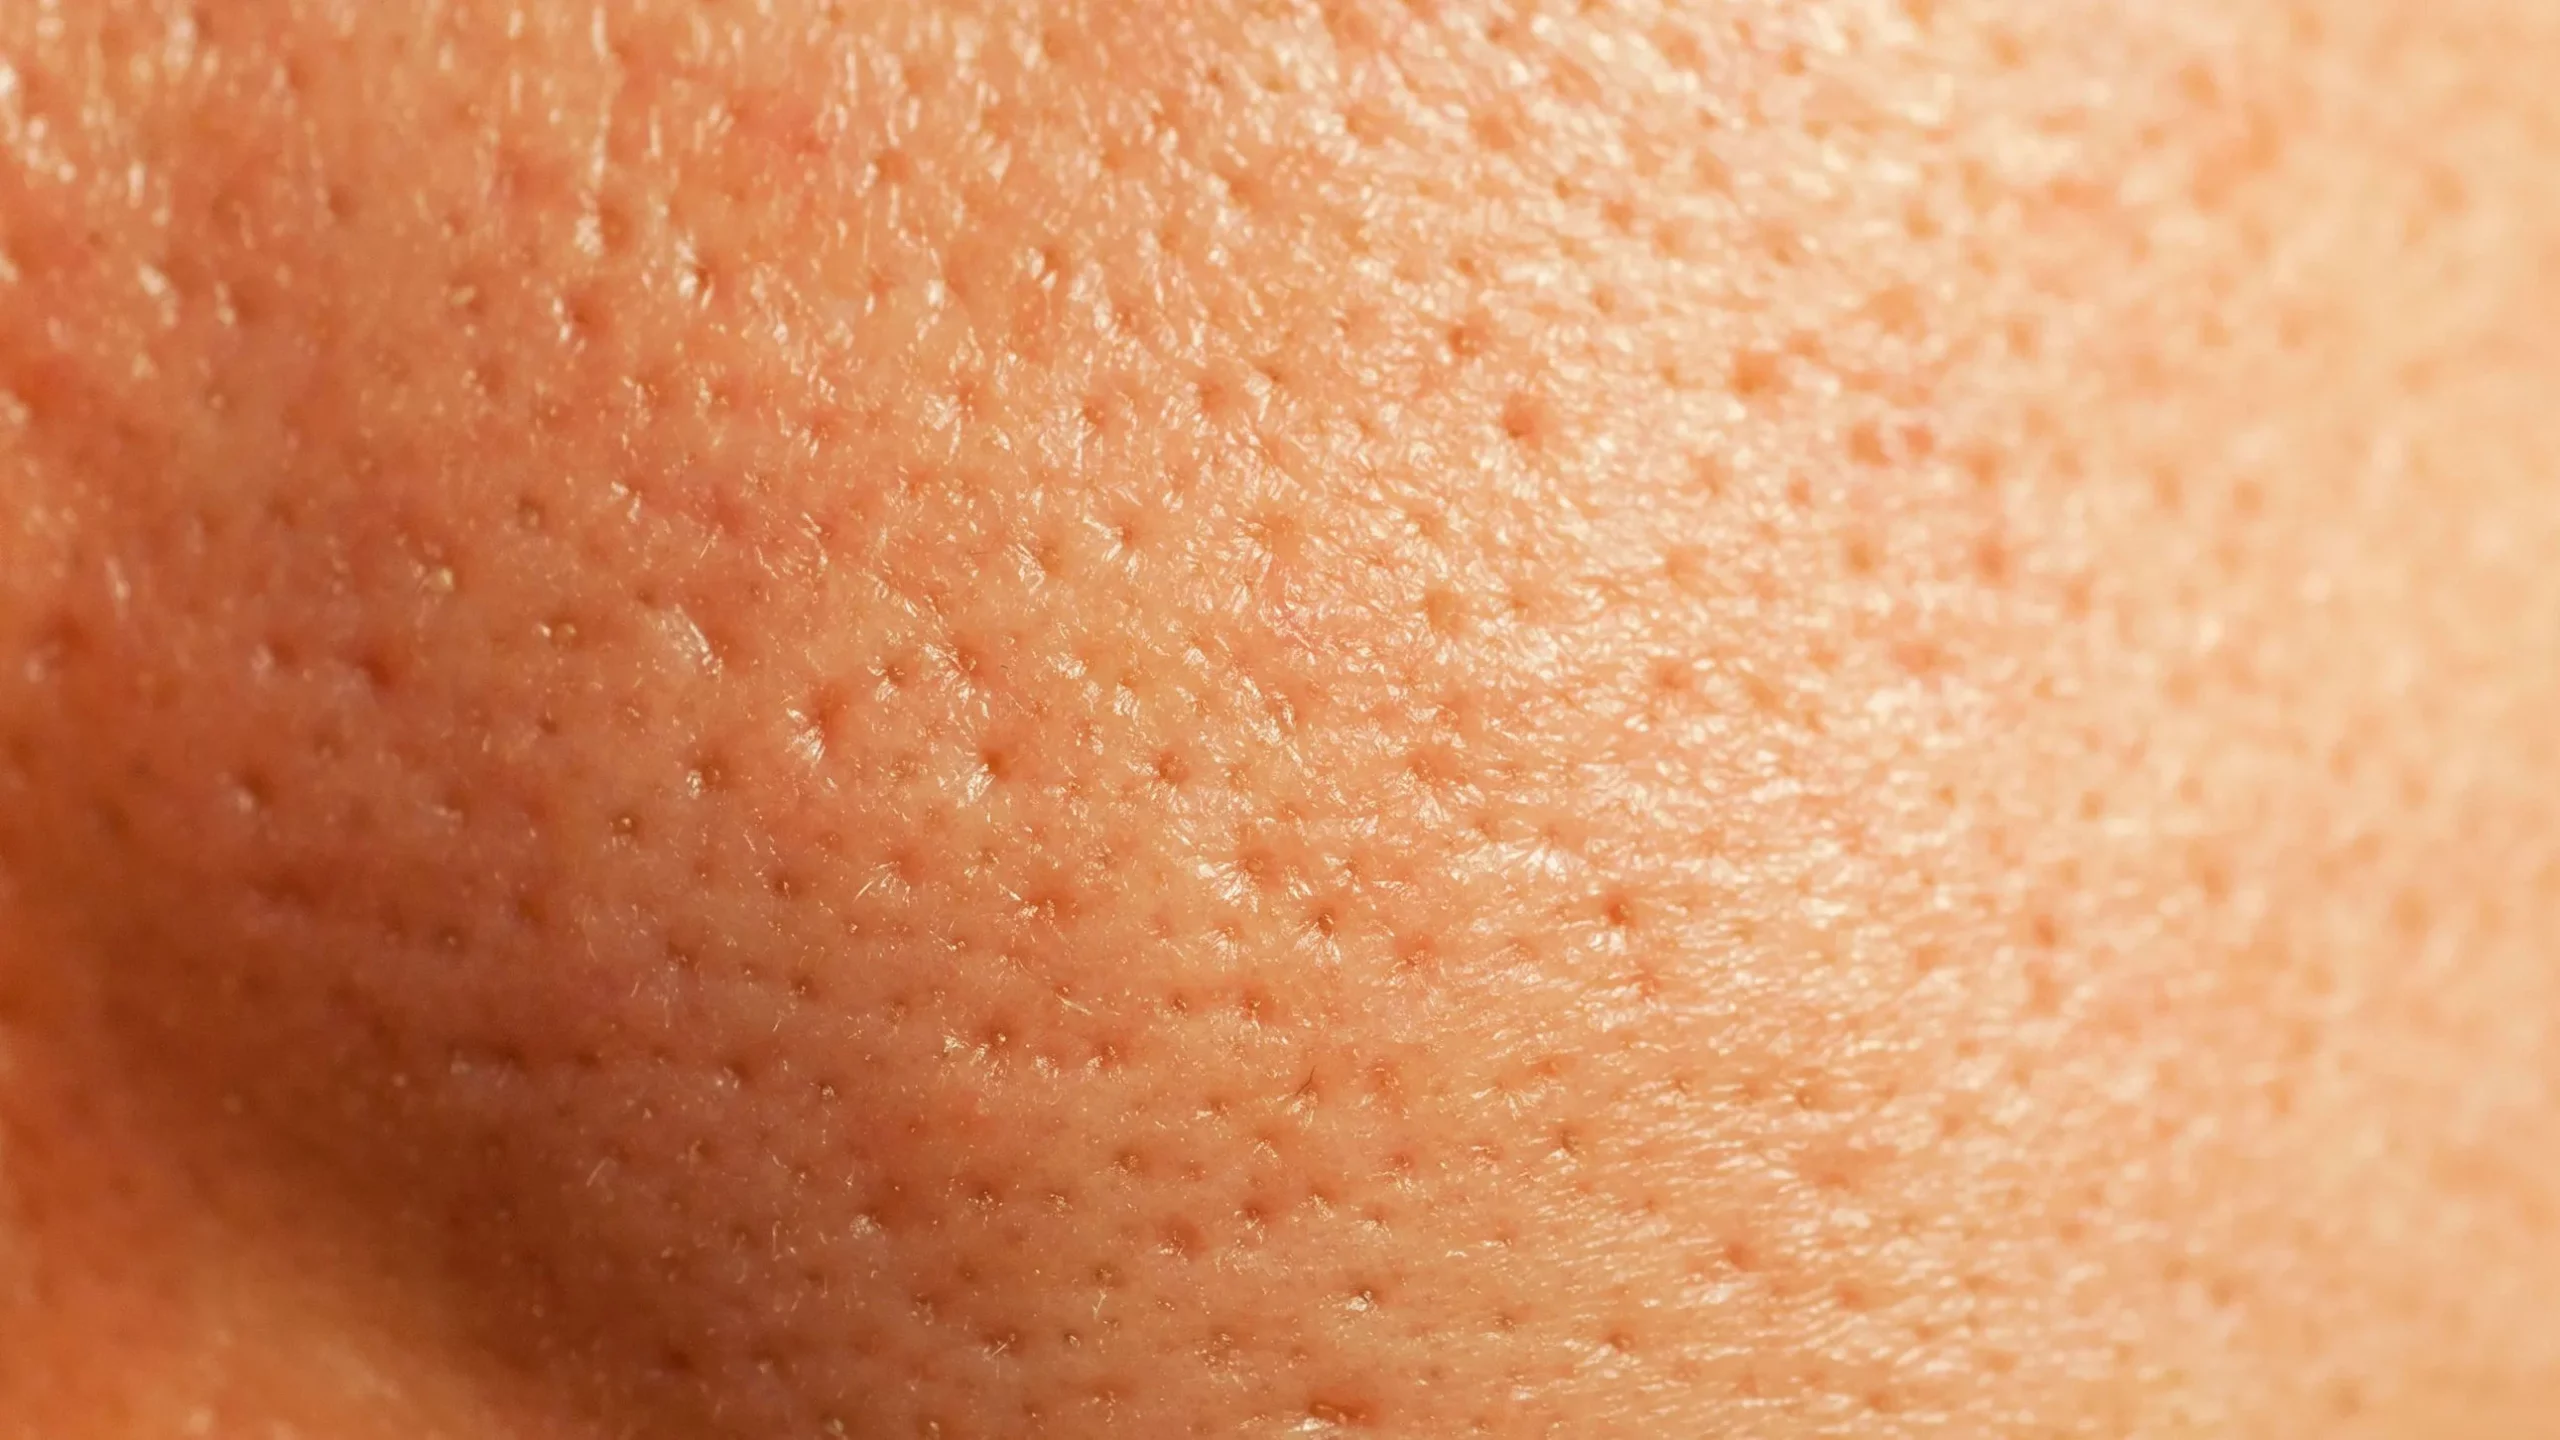 Get rid off open pores with these simple home remedies